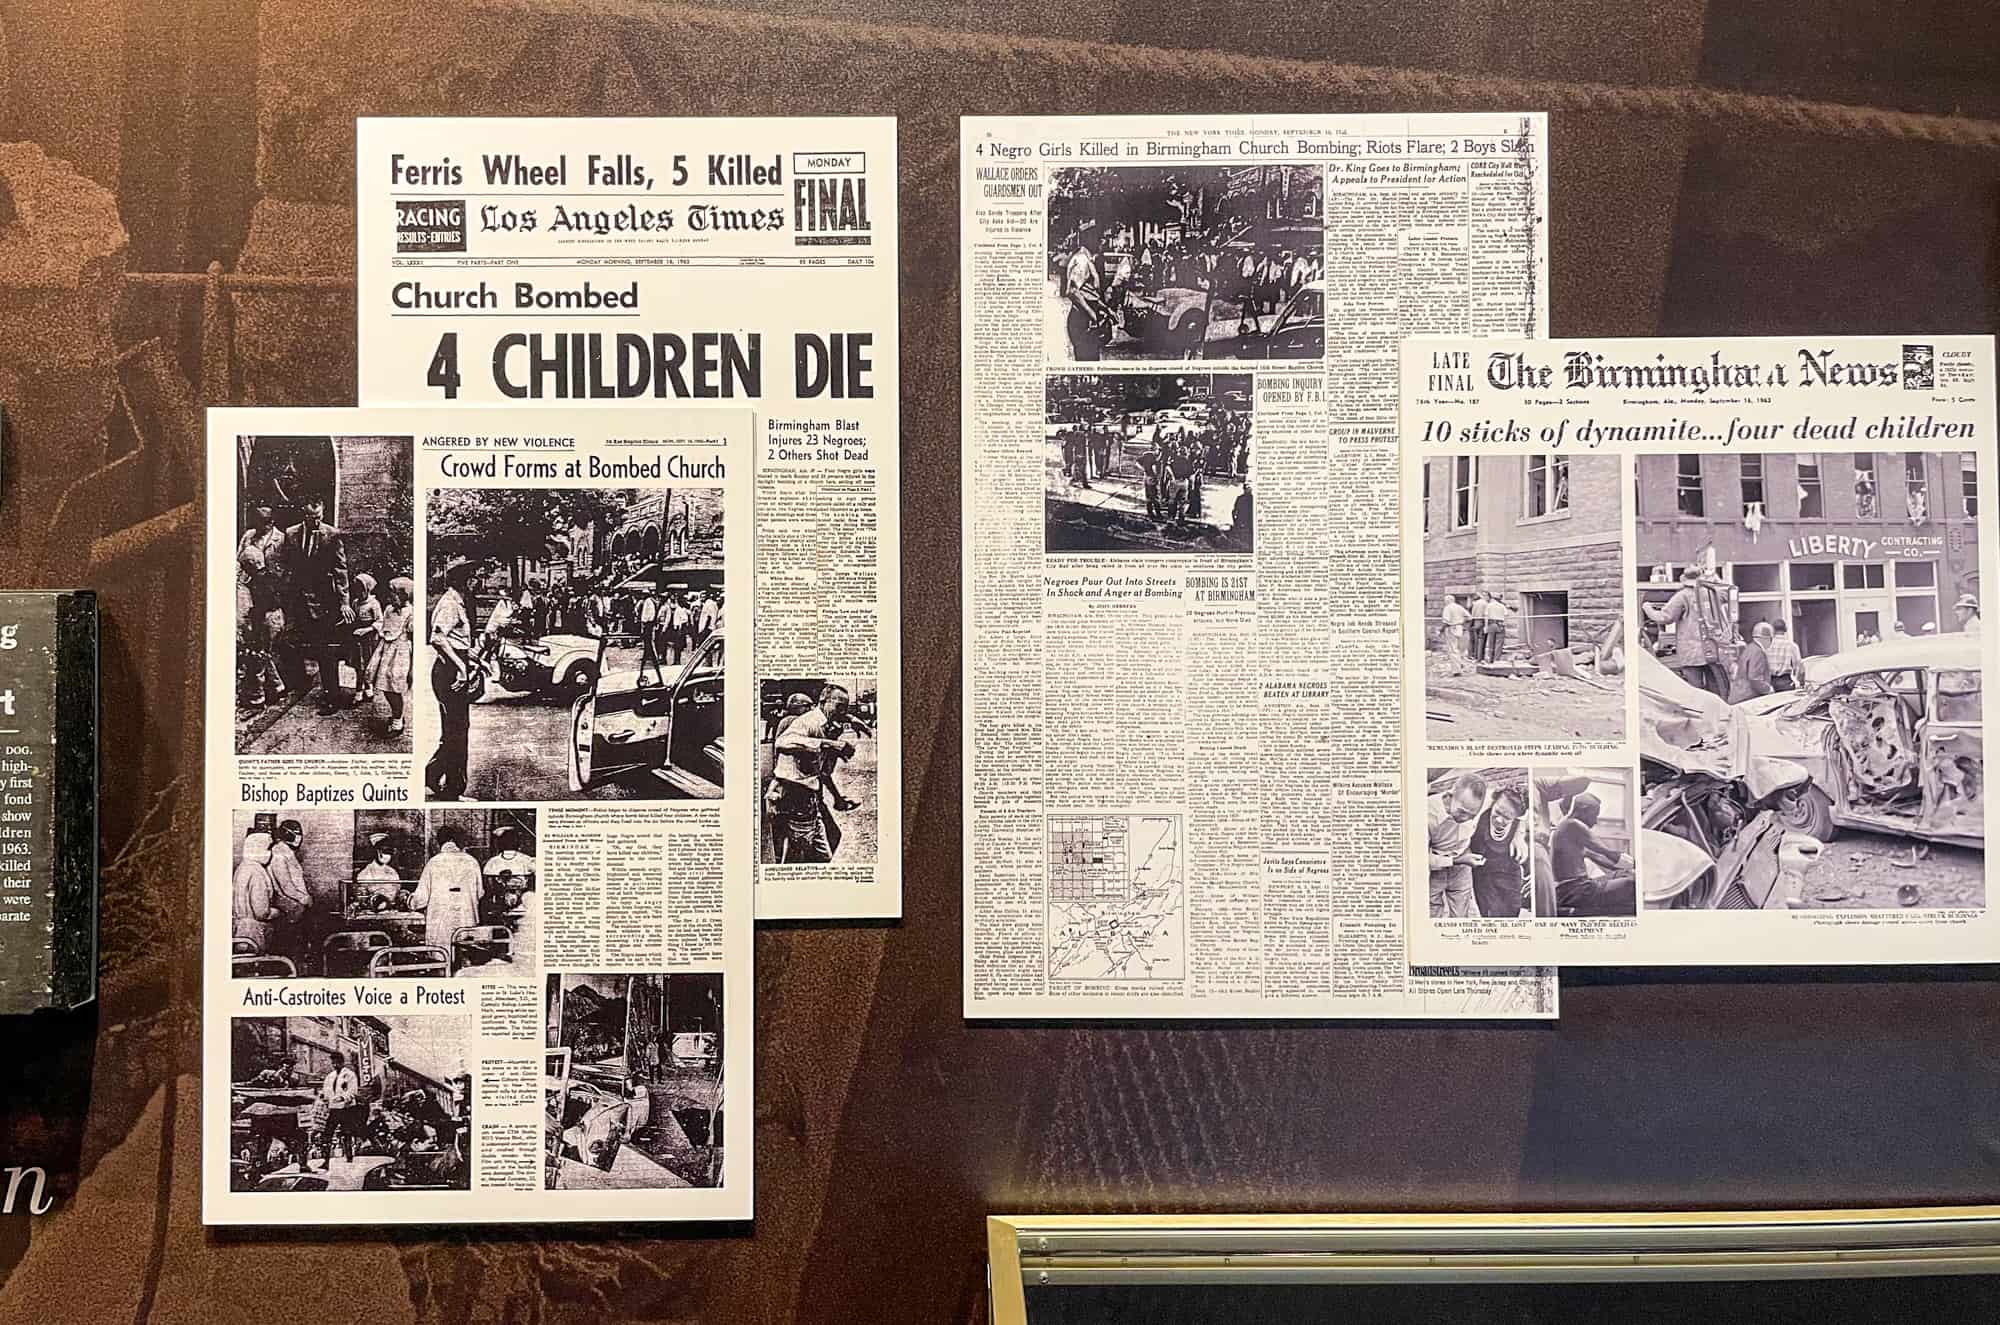 Inside Birmingham Civil Rights Institute in Alabama - News clippings of bombinat 16th Street